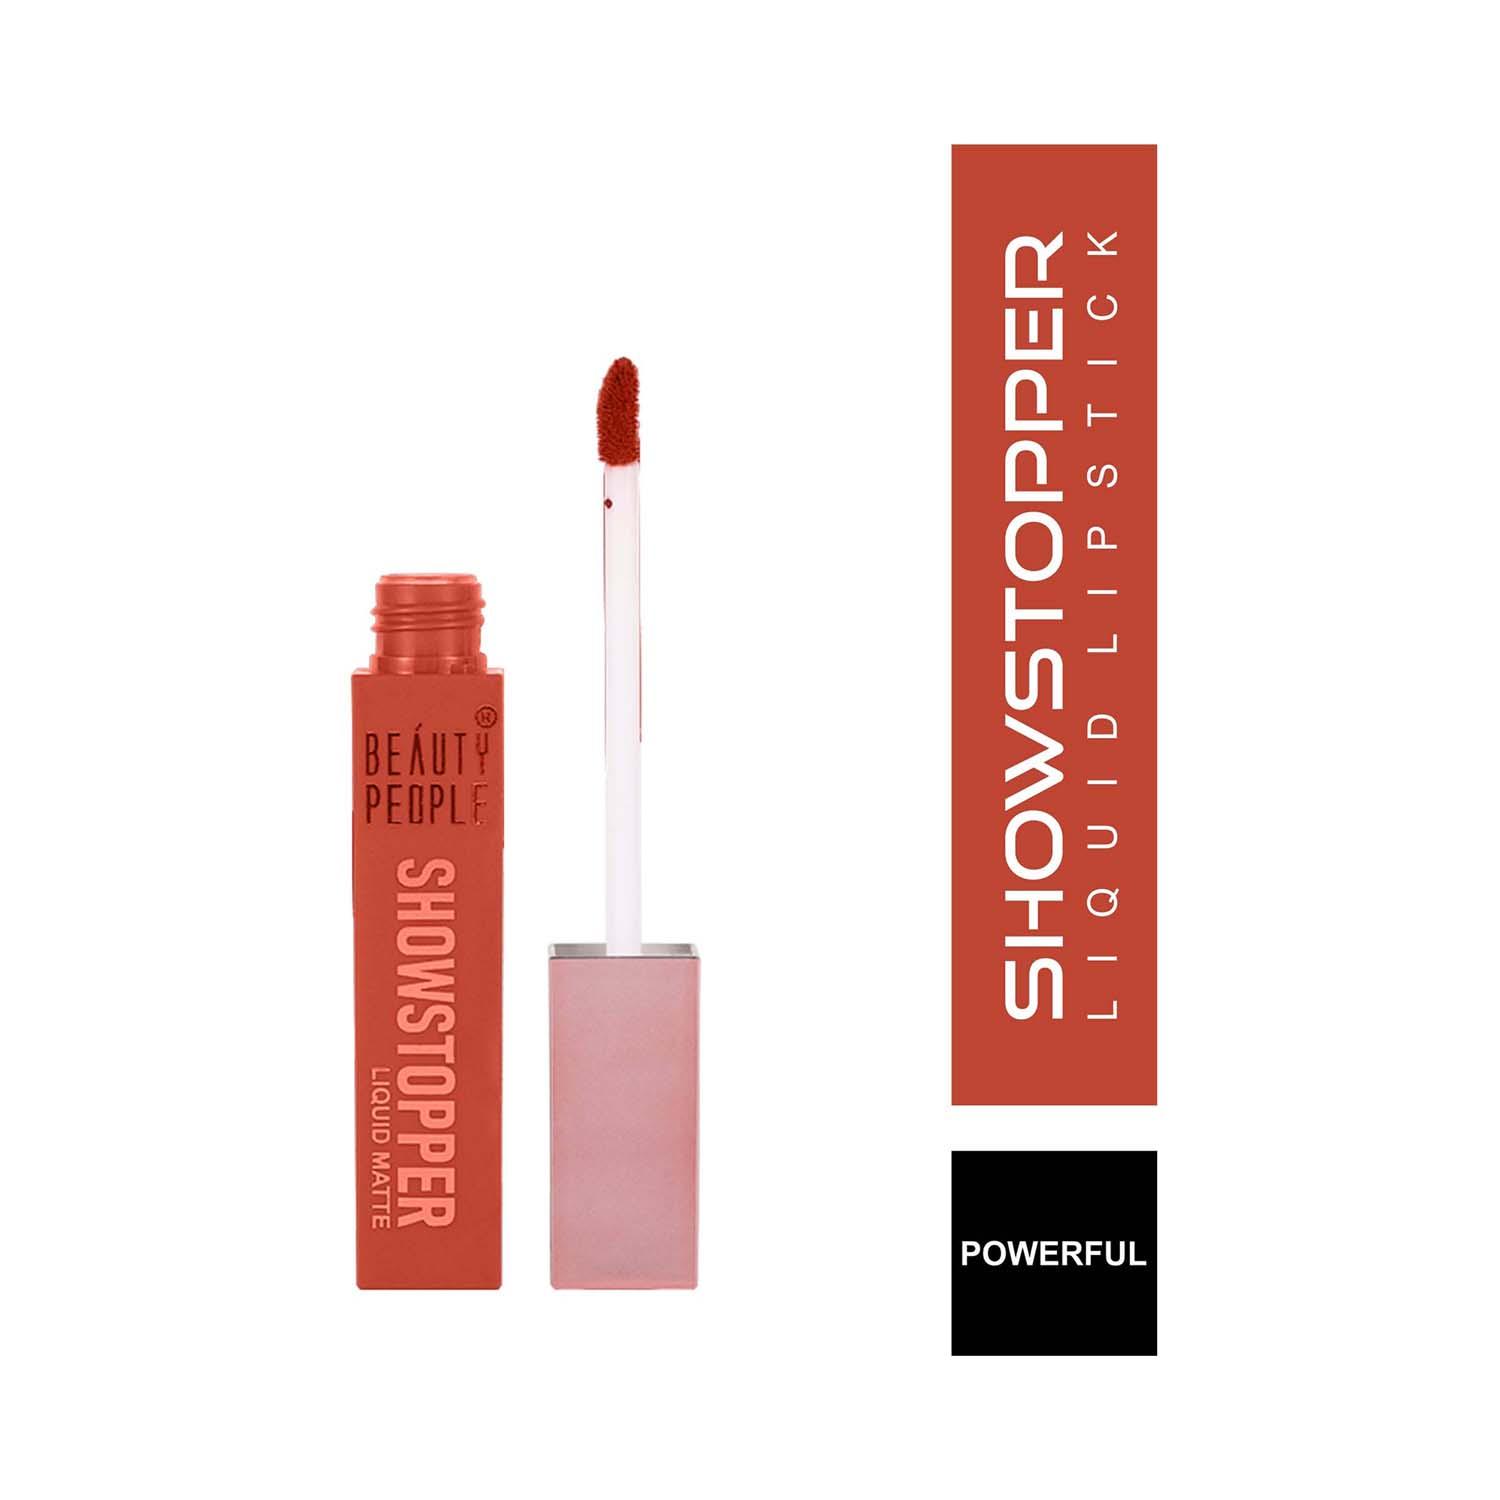 Beauty People | Beauty People Showstopper Liquid Lip Color with SPF 15 & Vitamin E - 06 Powerful (4ml)